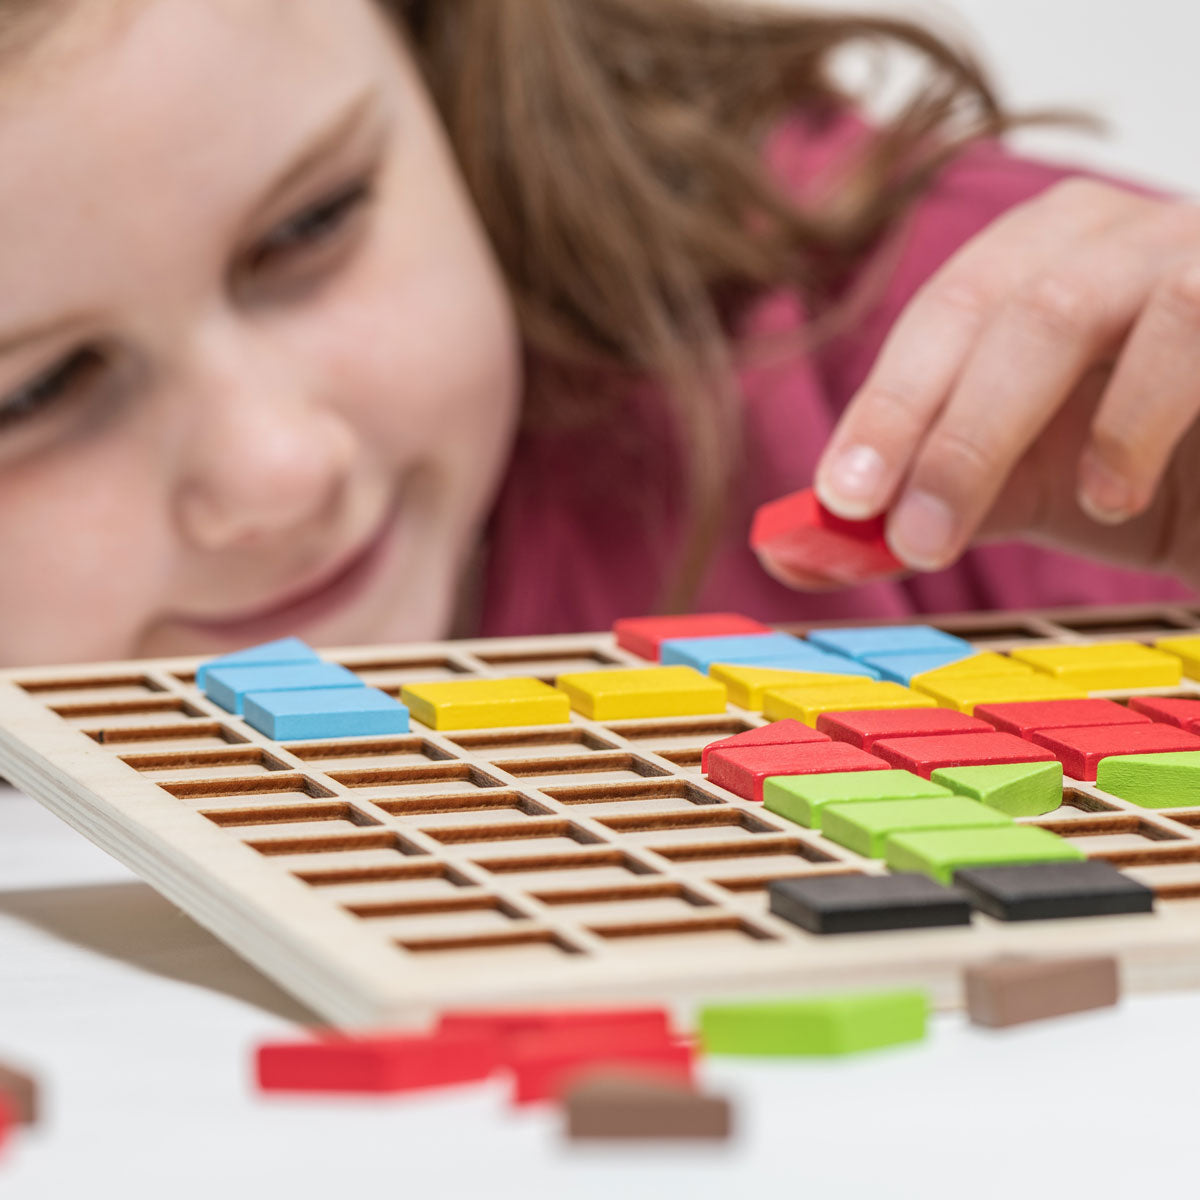 Wooden Mosaic Set,The 116 piece Wooden Mosaic Set is a fantastic way for children to engage in creative and stimulating play, while also developing important skills such as fine motor control, problem-solving and colour recognition. With a range of 20 designs to choose from, or the freedom to create their own patterns, children will love the challenge of fitting the colourful wooden squares and triangles into the wooden grid. The pieces come in six vibrant colours and are made from sustainably sourced Beech